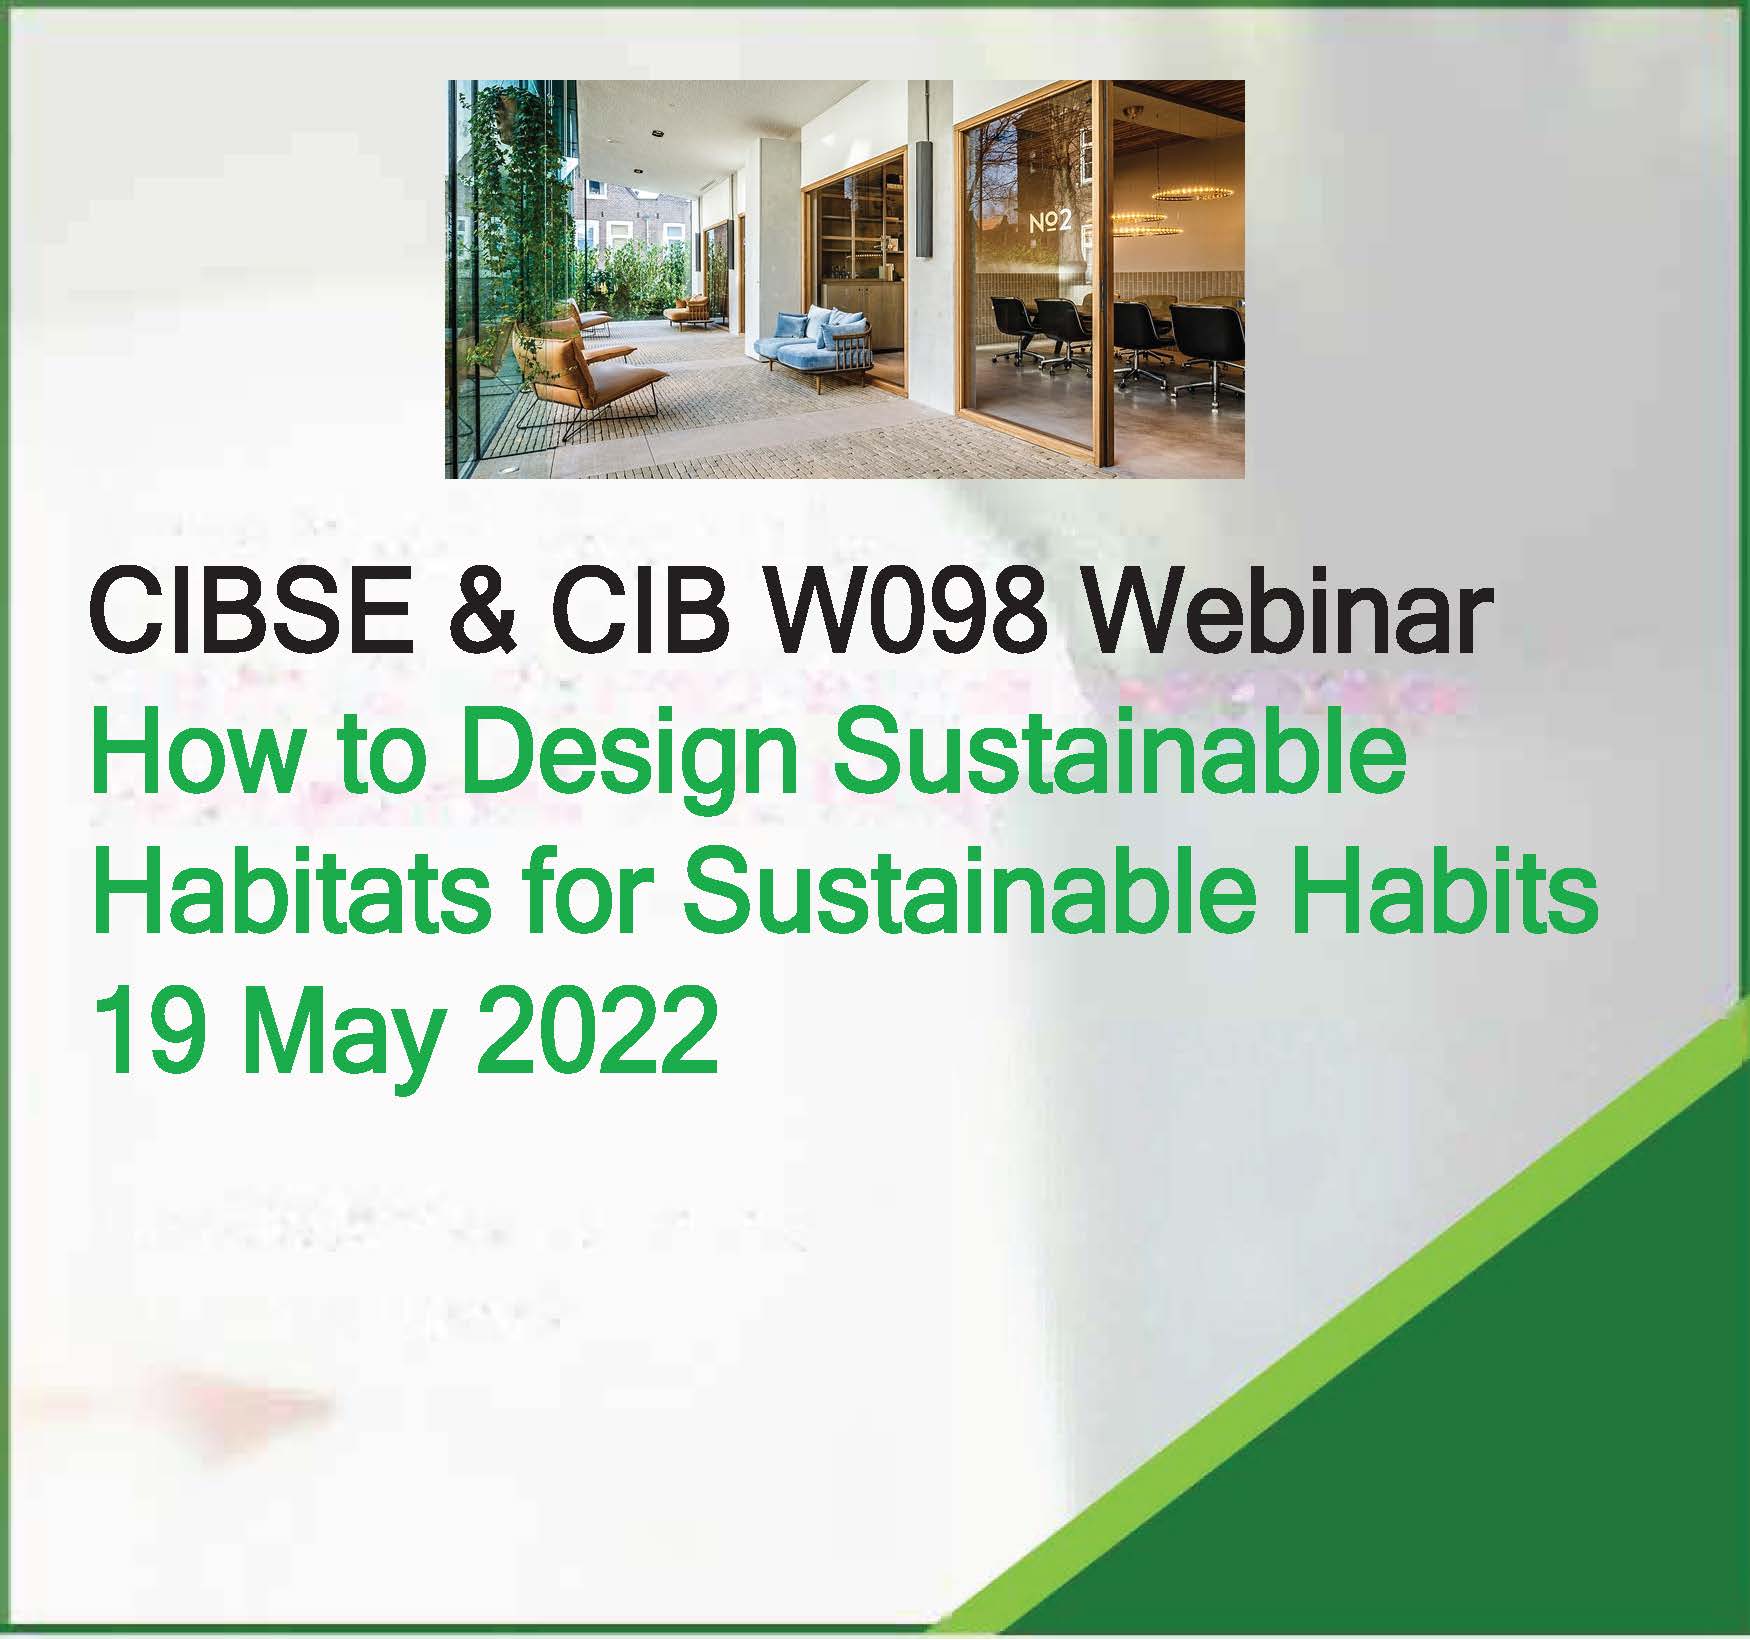 How to Design Sustainable Habitats for Sustainable Habits – CIBSE Intelligent Buildings Group & CIB W098 Commission on Intelligent and Responsive Buildings